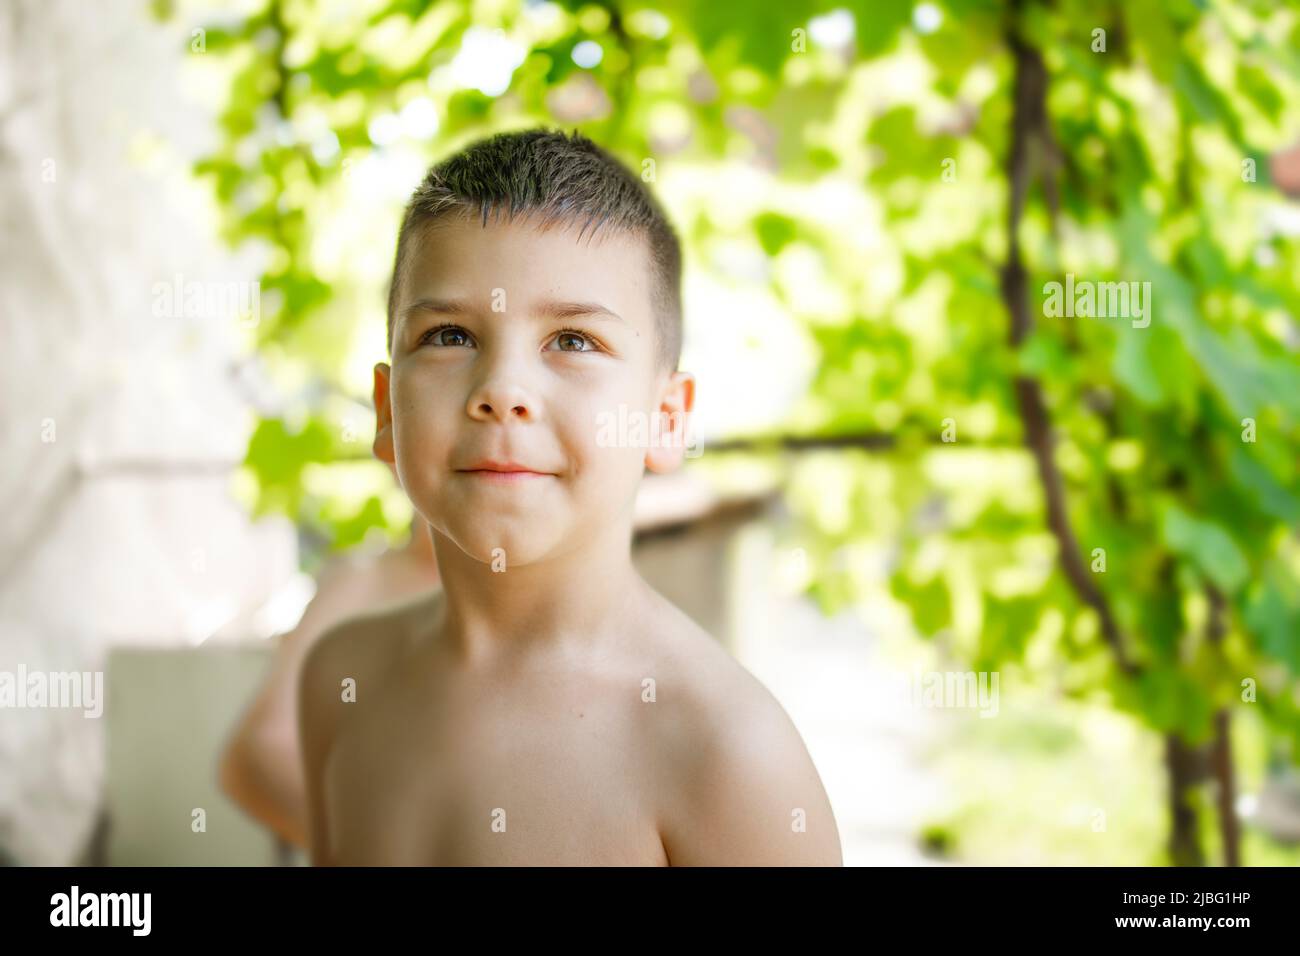 Face of a young boy smiling and enjoying hot summer weekend Stock Photo